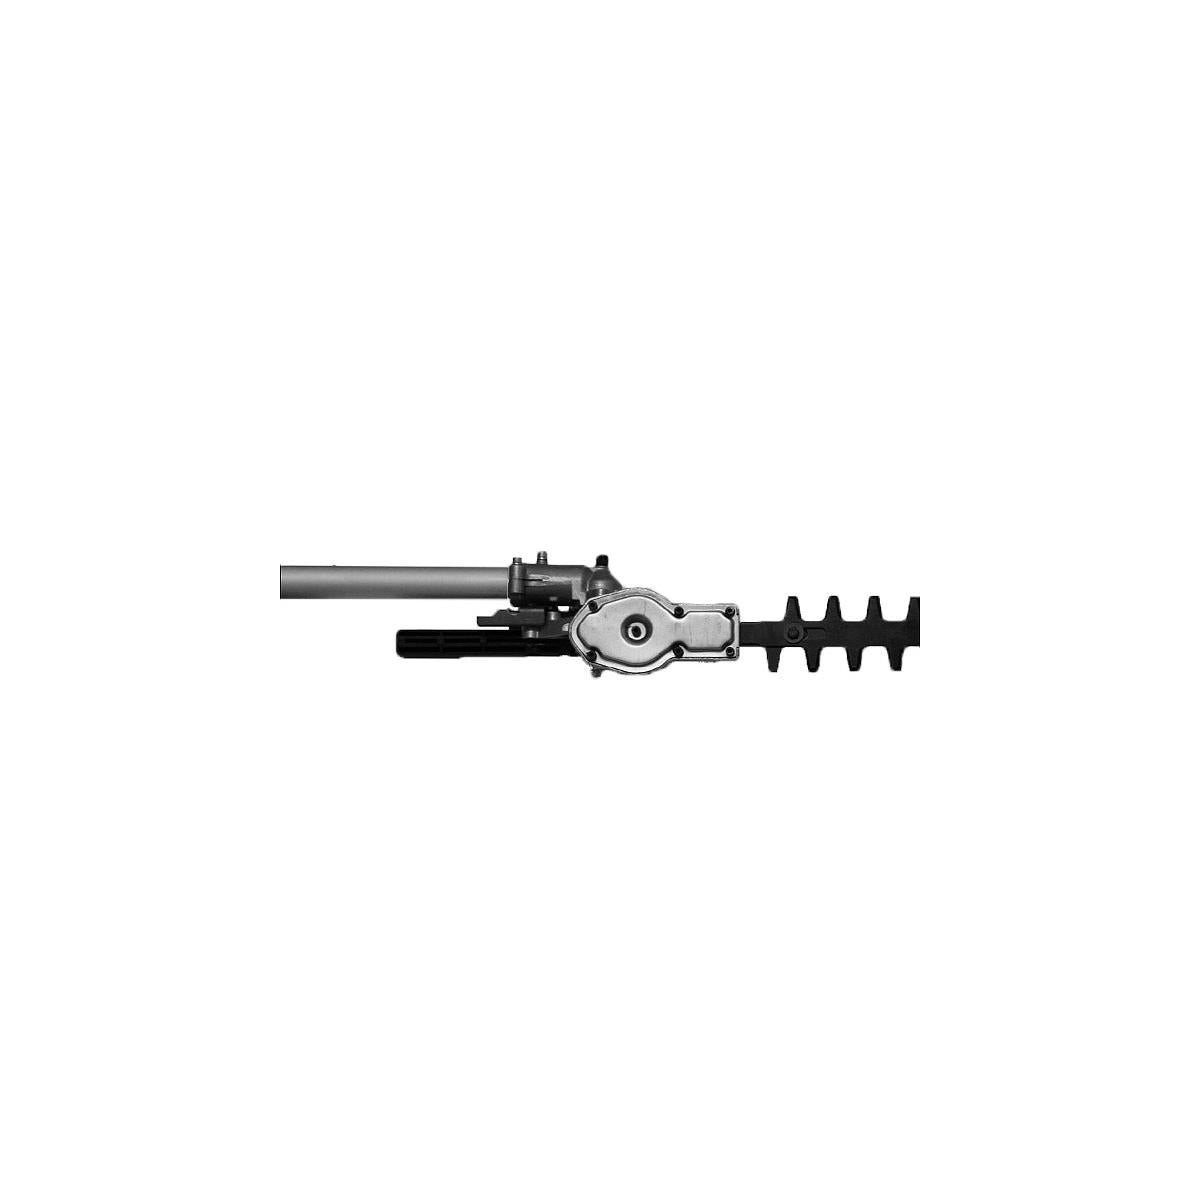 FUXTEC hedge trimmer attachment for "Multitool-Systems" MT5in1, MT4in1, MT2in1 and RT226